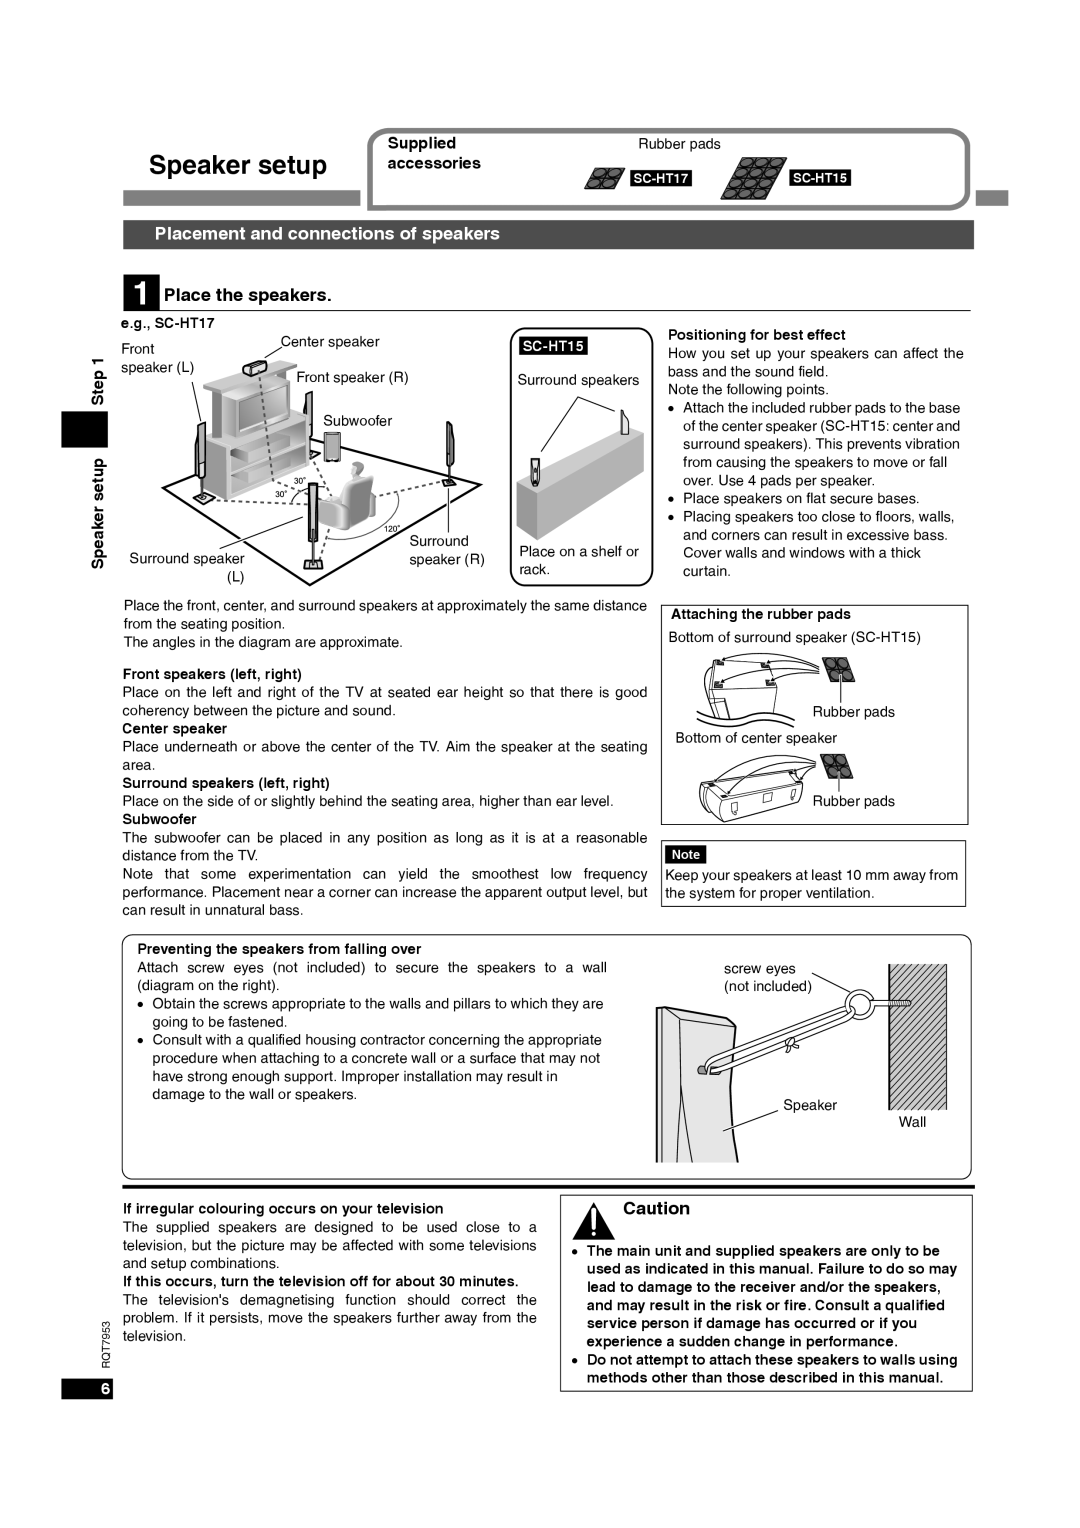 Panasonic SC-HT17 operating instructions Placement and connections of speakers, Place the speakers, Speaker setup, SC-HT15 